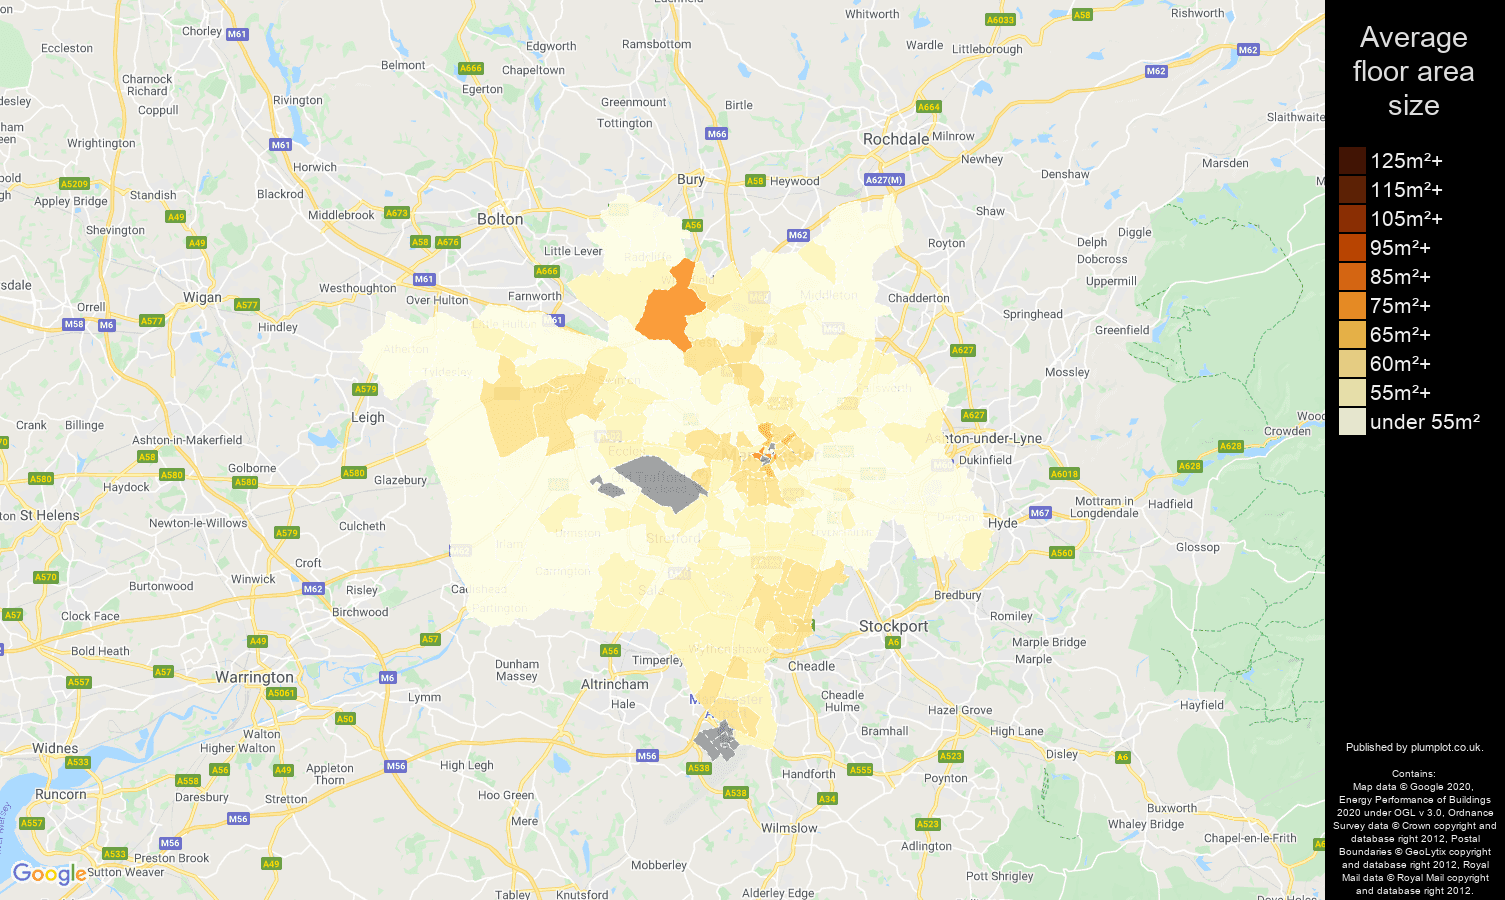 Manchester map of average floor area size of flats